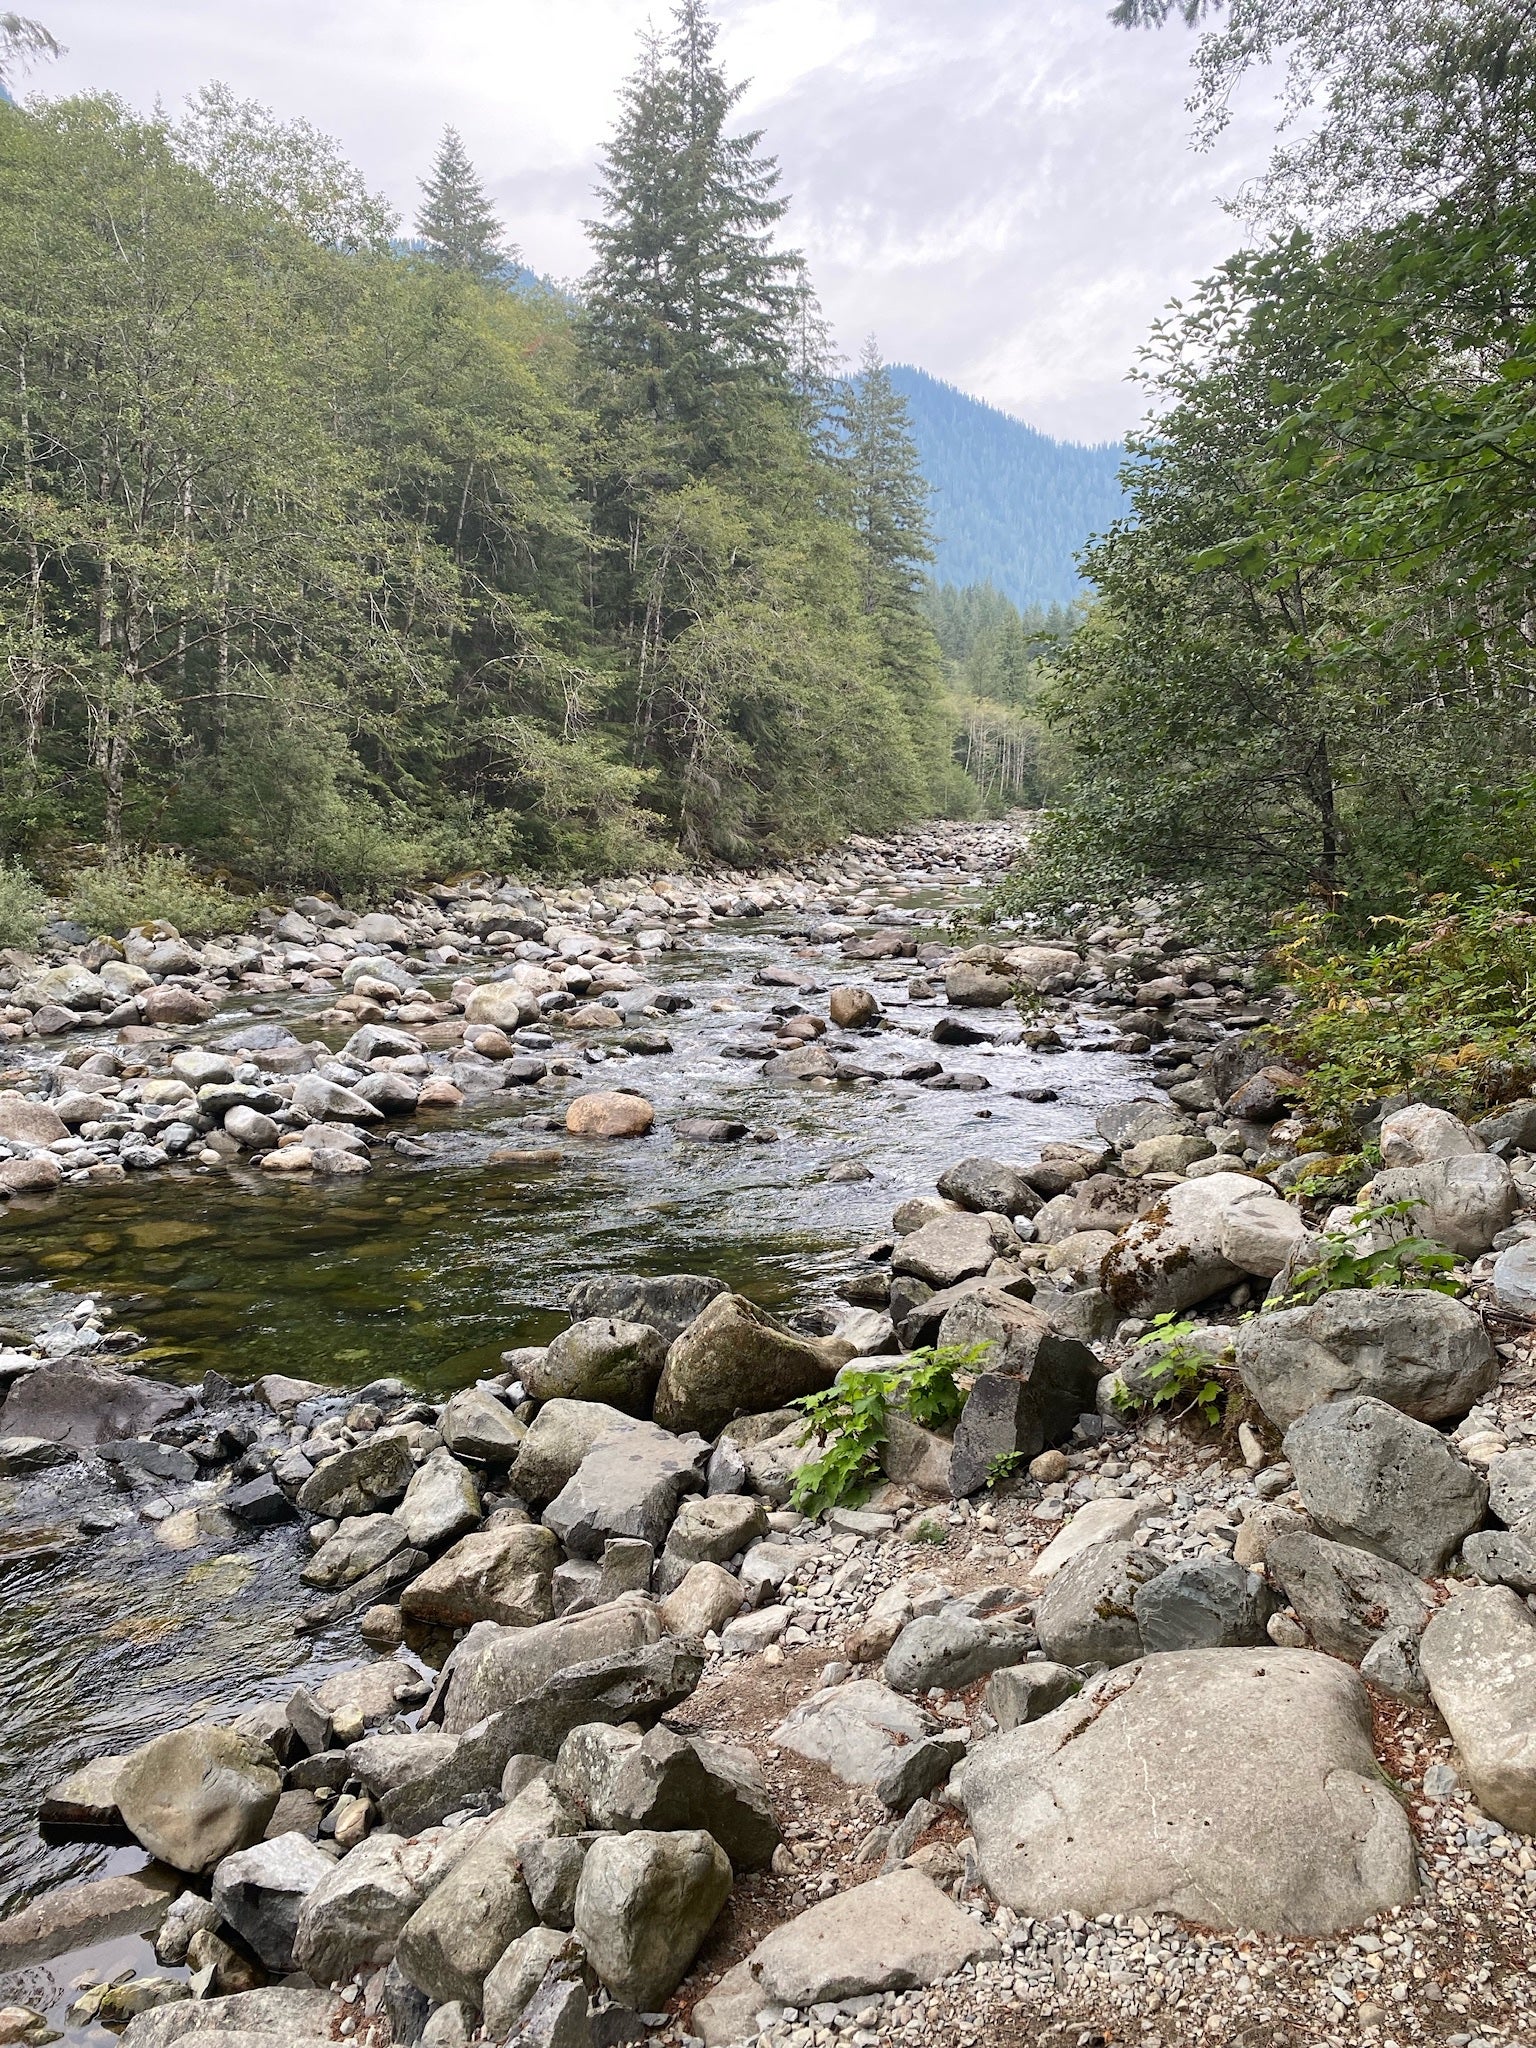 Camper submitted image from Middle Fork Snoqualmie River - 3